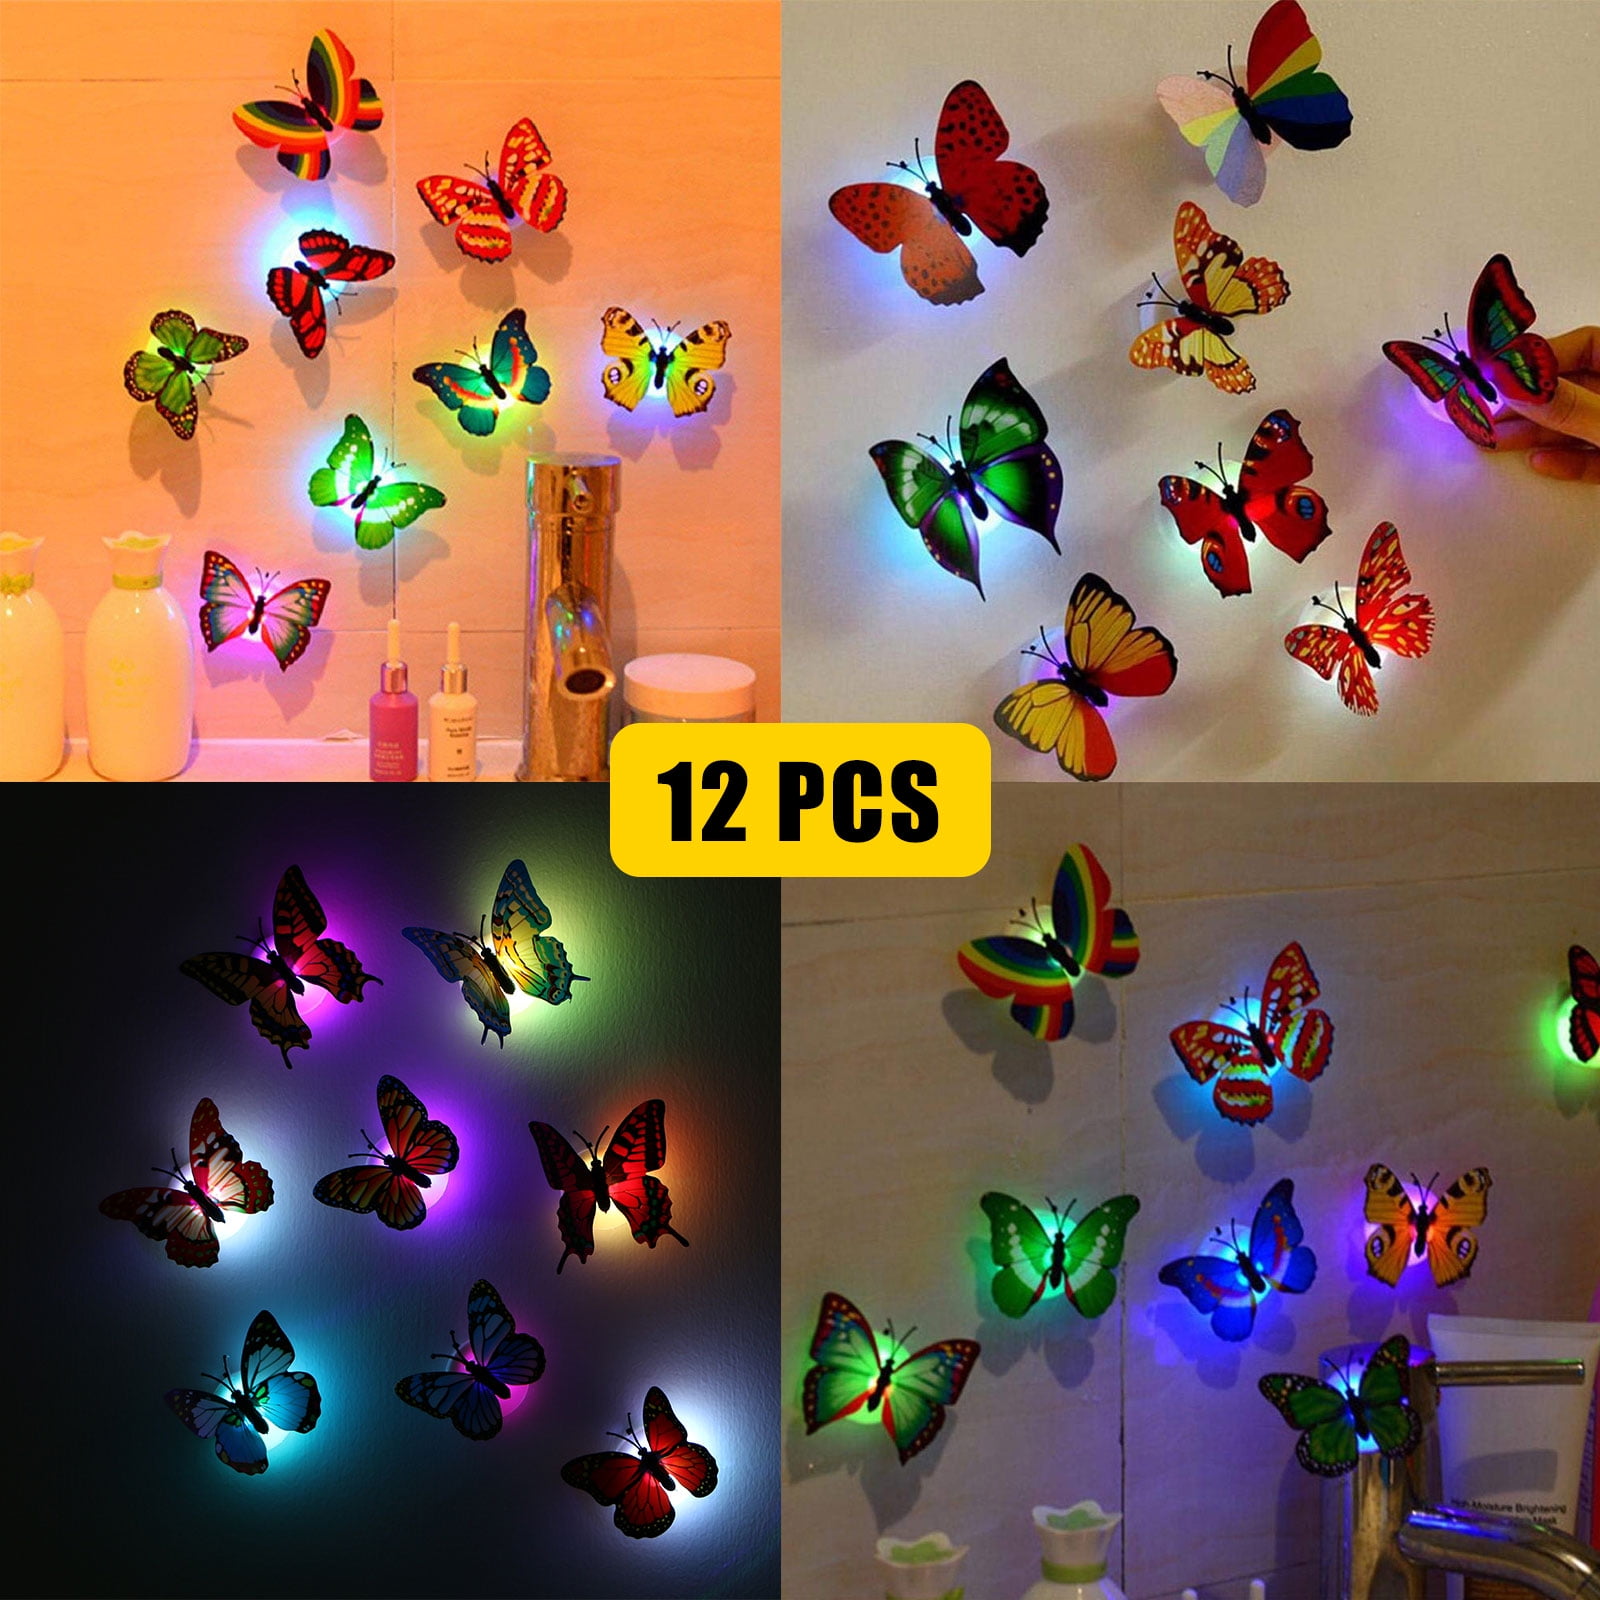 12Pcs 3D Butterfly Wall Stickers Decal Removable Mural Home Room Nursery Decor 